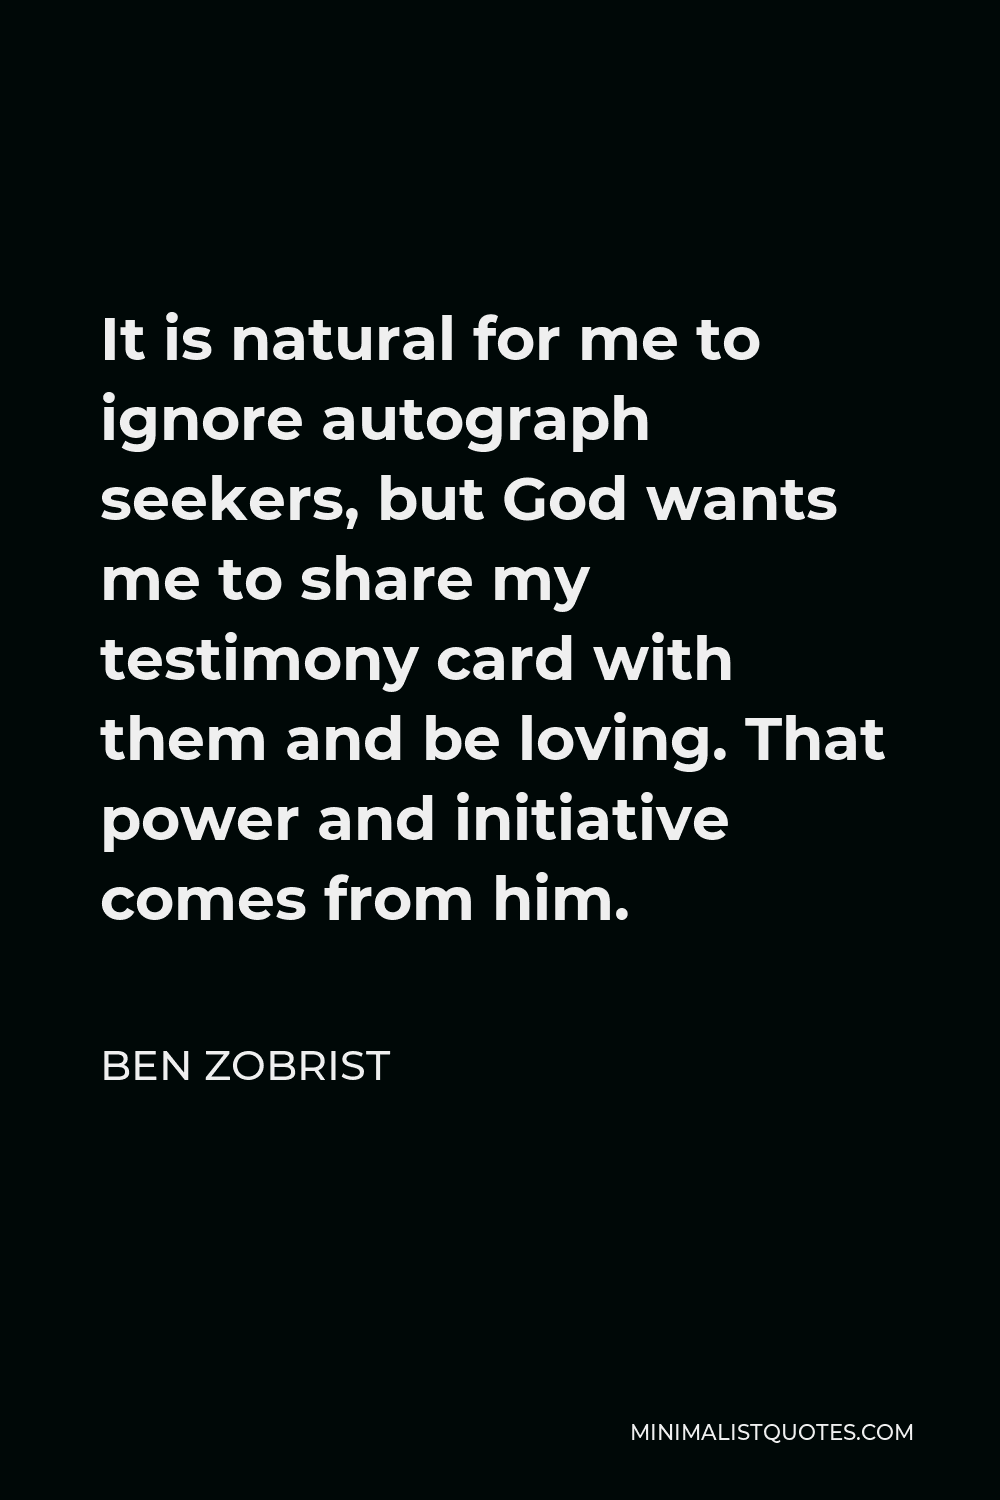 Ben Zobrist Quote - It is natural for me to ignore autograph seekers, but God wants me to share my testimony card with them and be loving. That power and initiative comes from him.